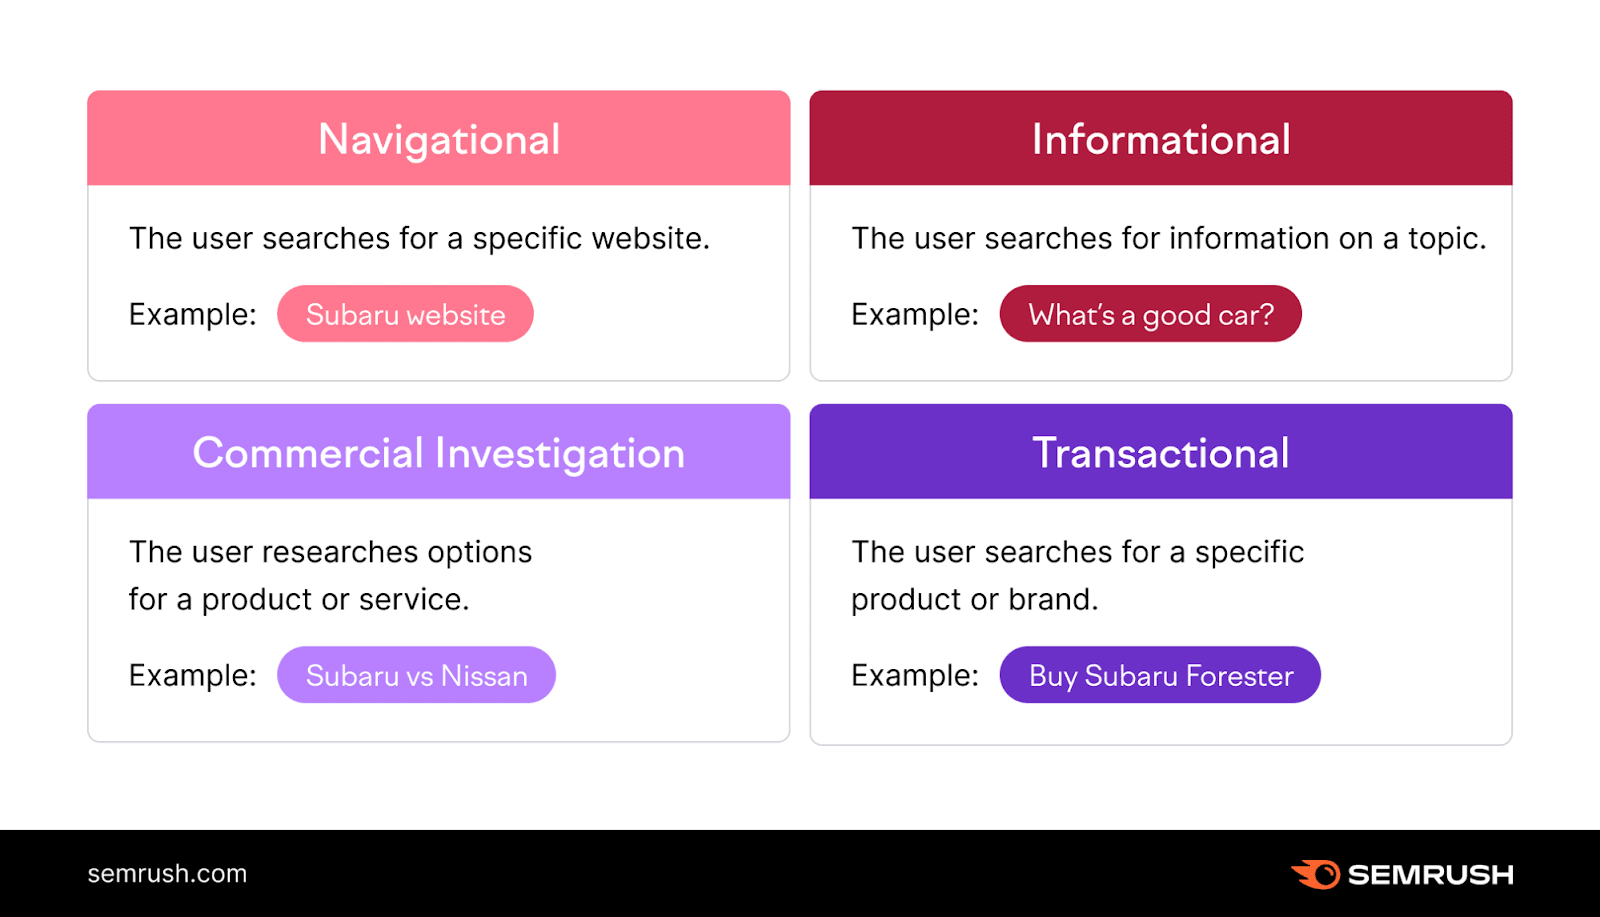 Semrush infographic showing types of search intent: navigational, informational, commercial and transactional, with examples